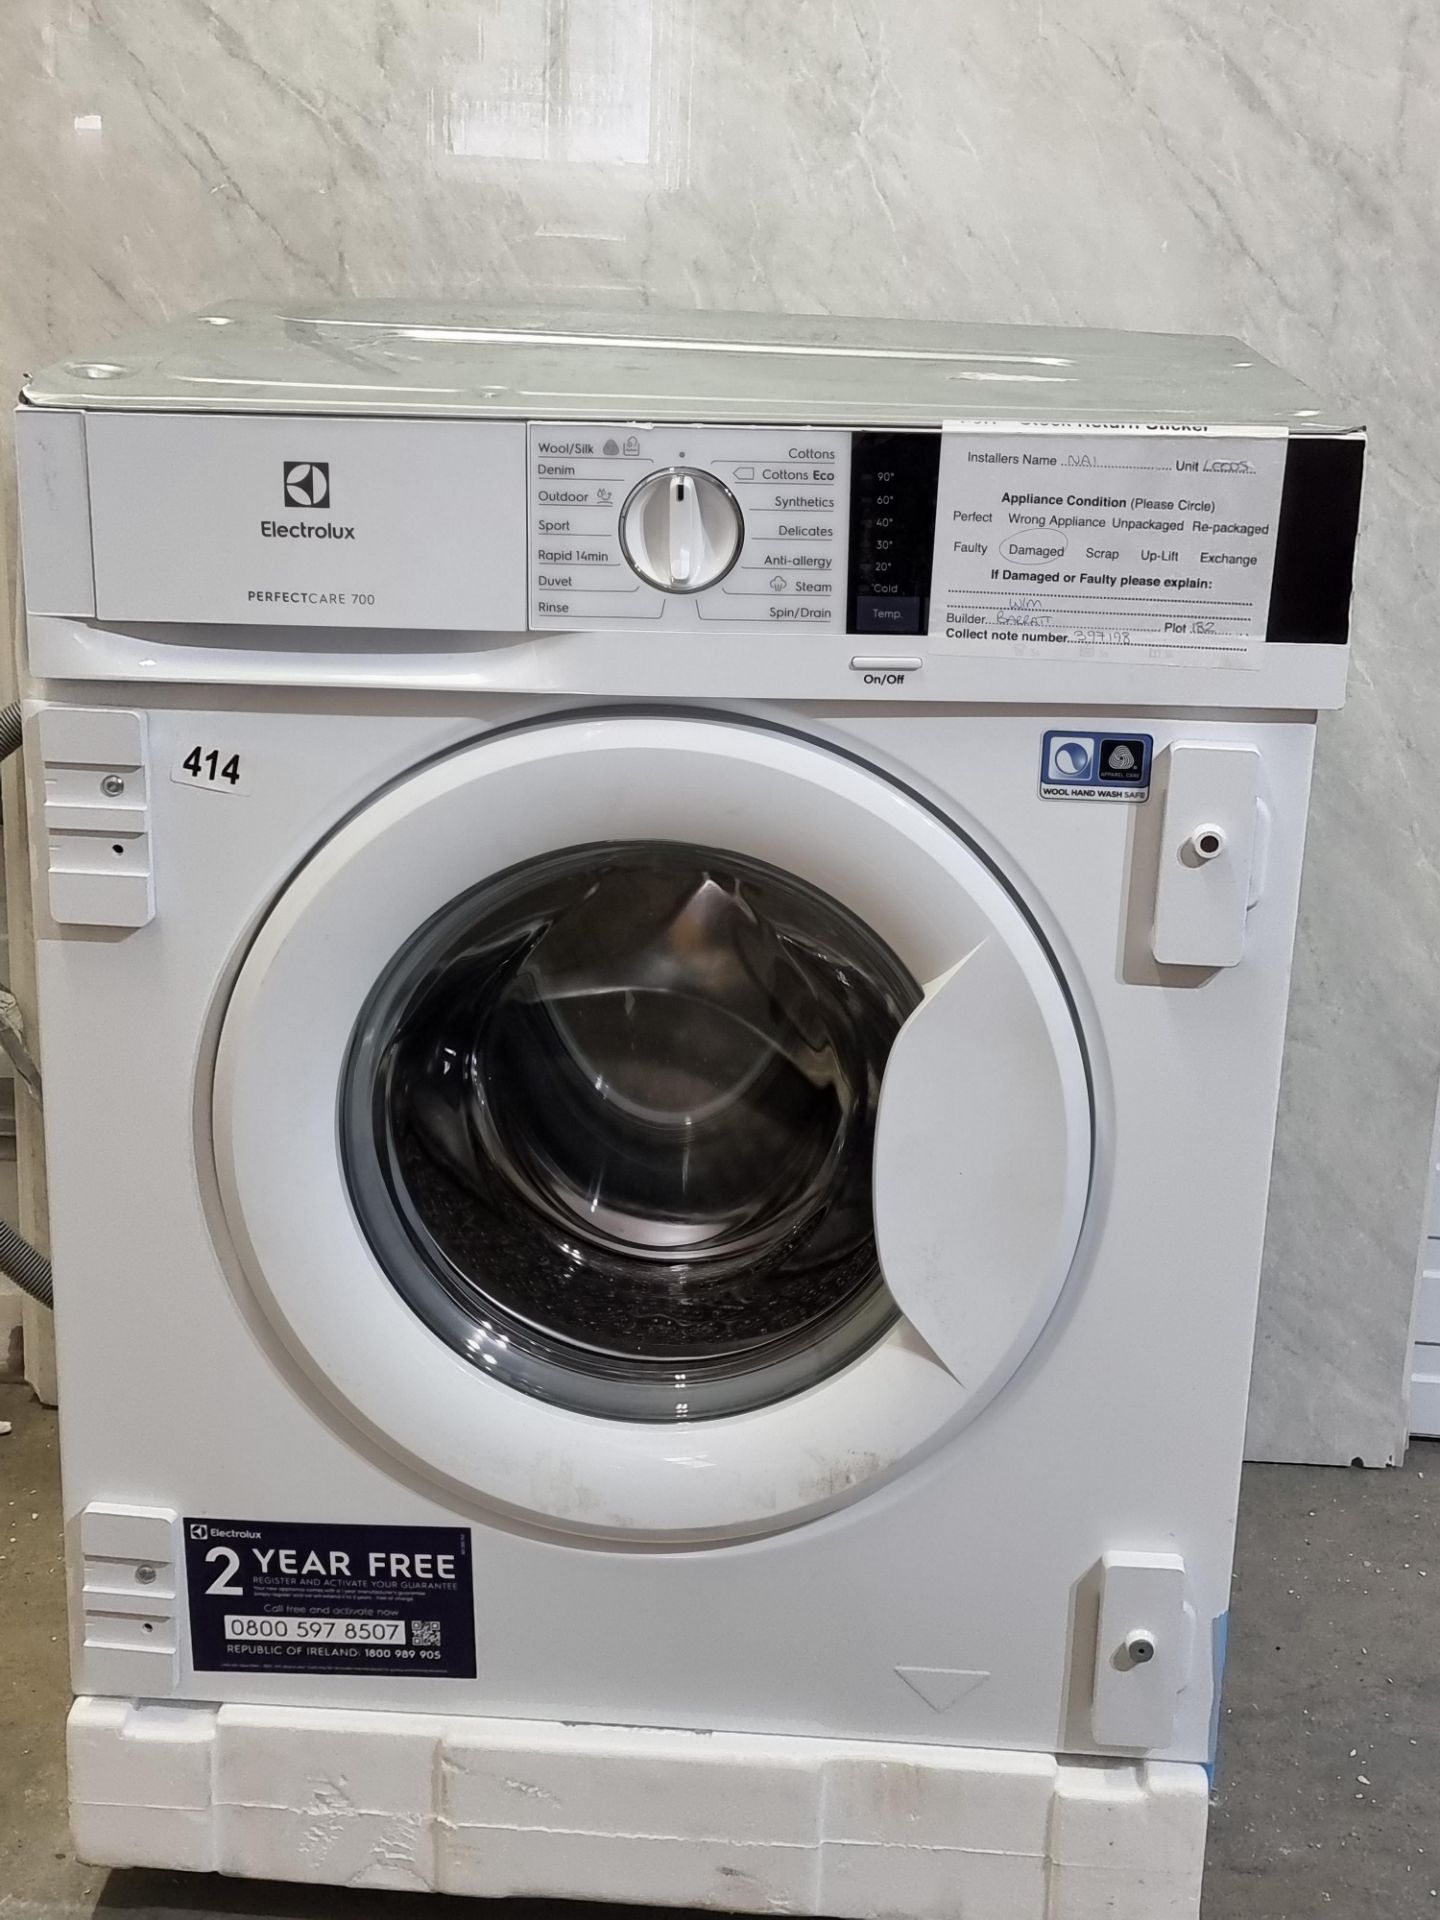 Electrolux E776W402BI, Built In Washer/Dryer 7kg wash and 4kg dry capacity RRP £840